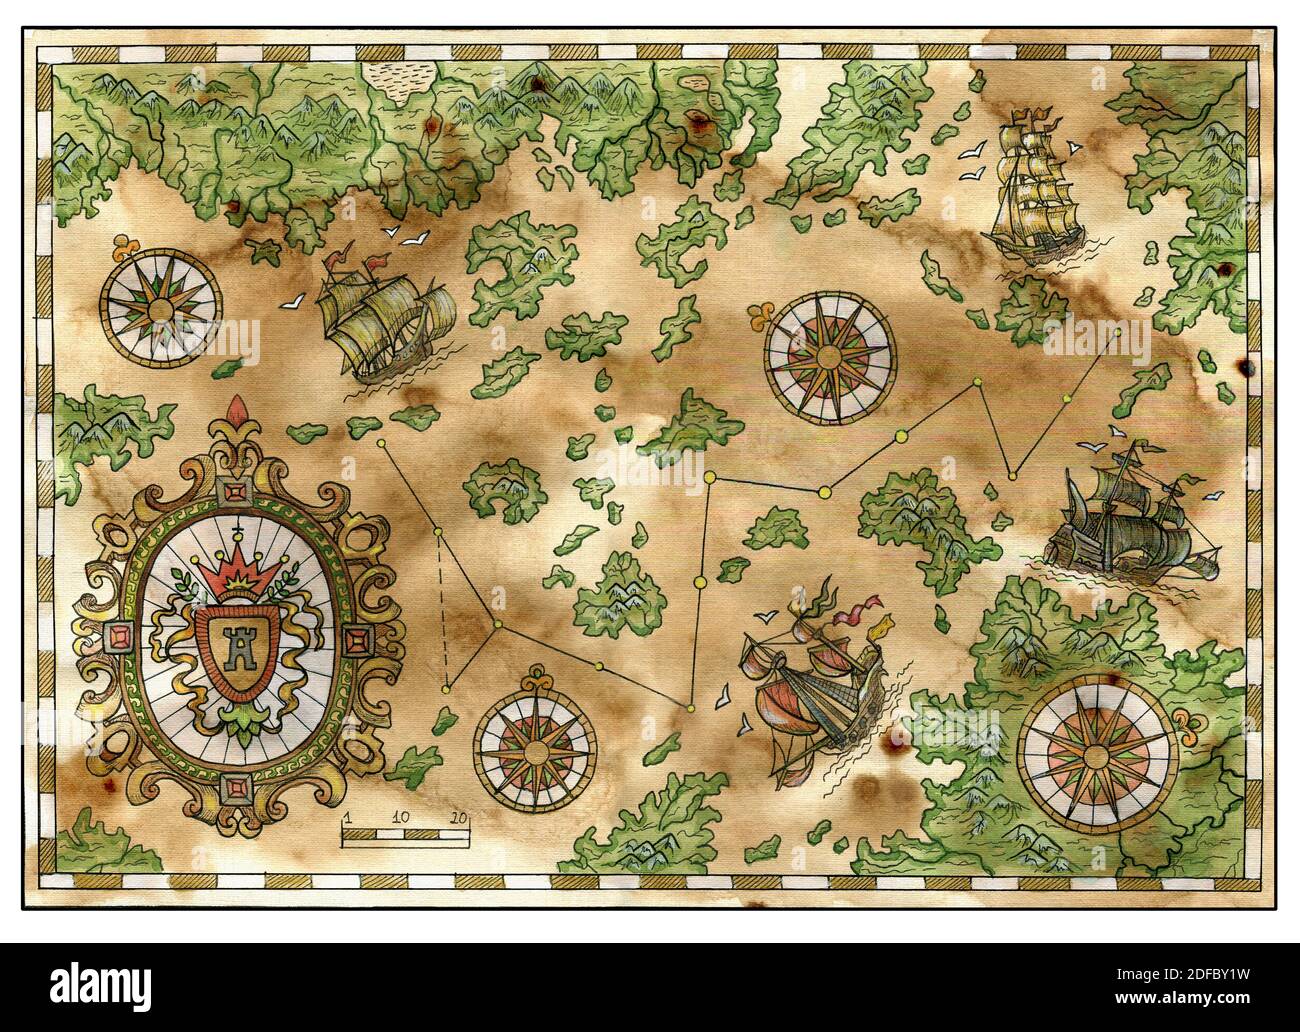 Treasure island map Cut Out Stock Images & Pictures - Alamy